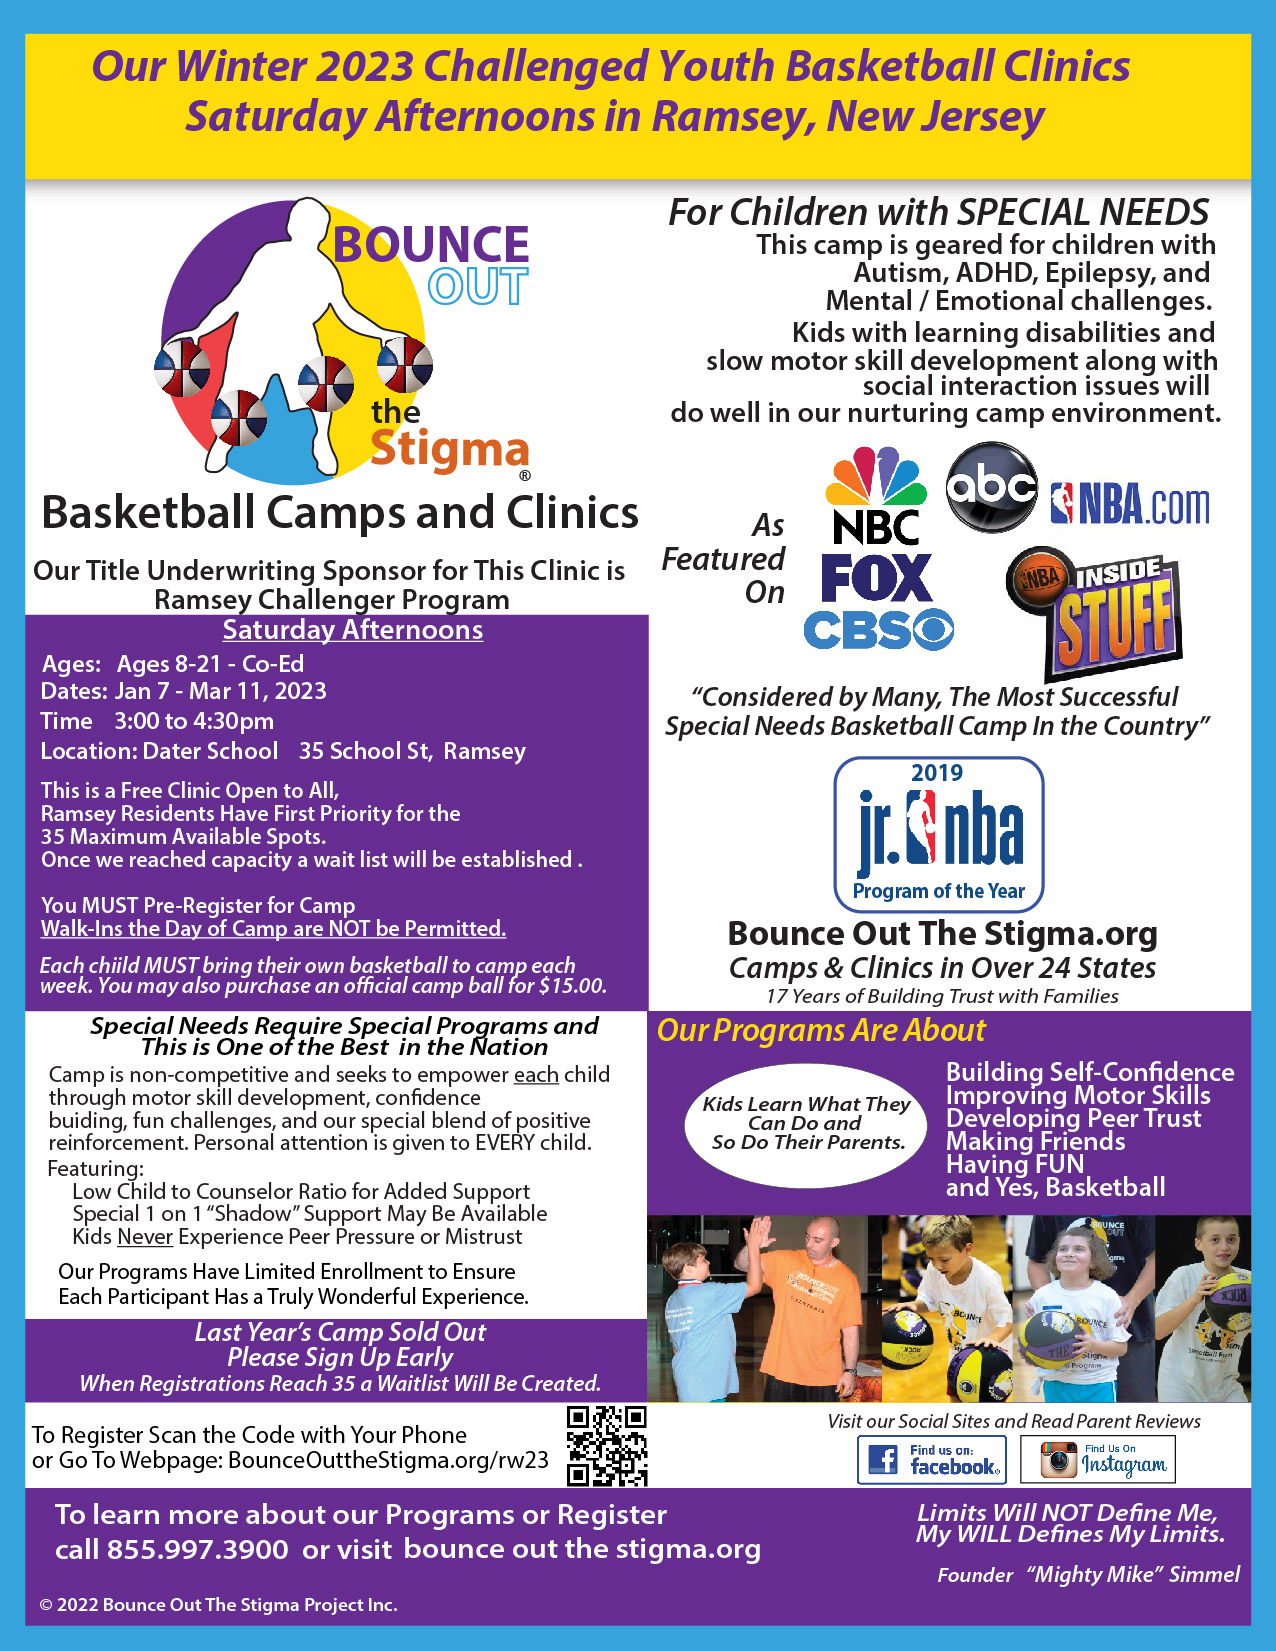 Bounce Out the Stigma Special Needs Basketball Camps in New Jersey